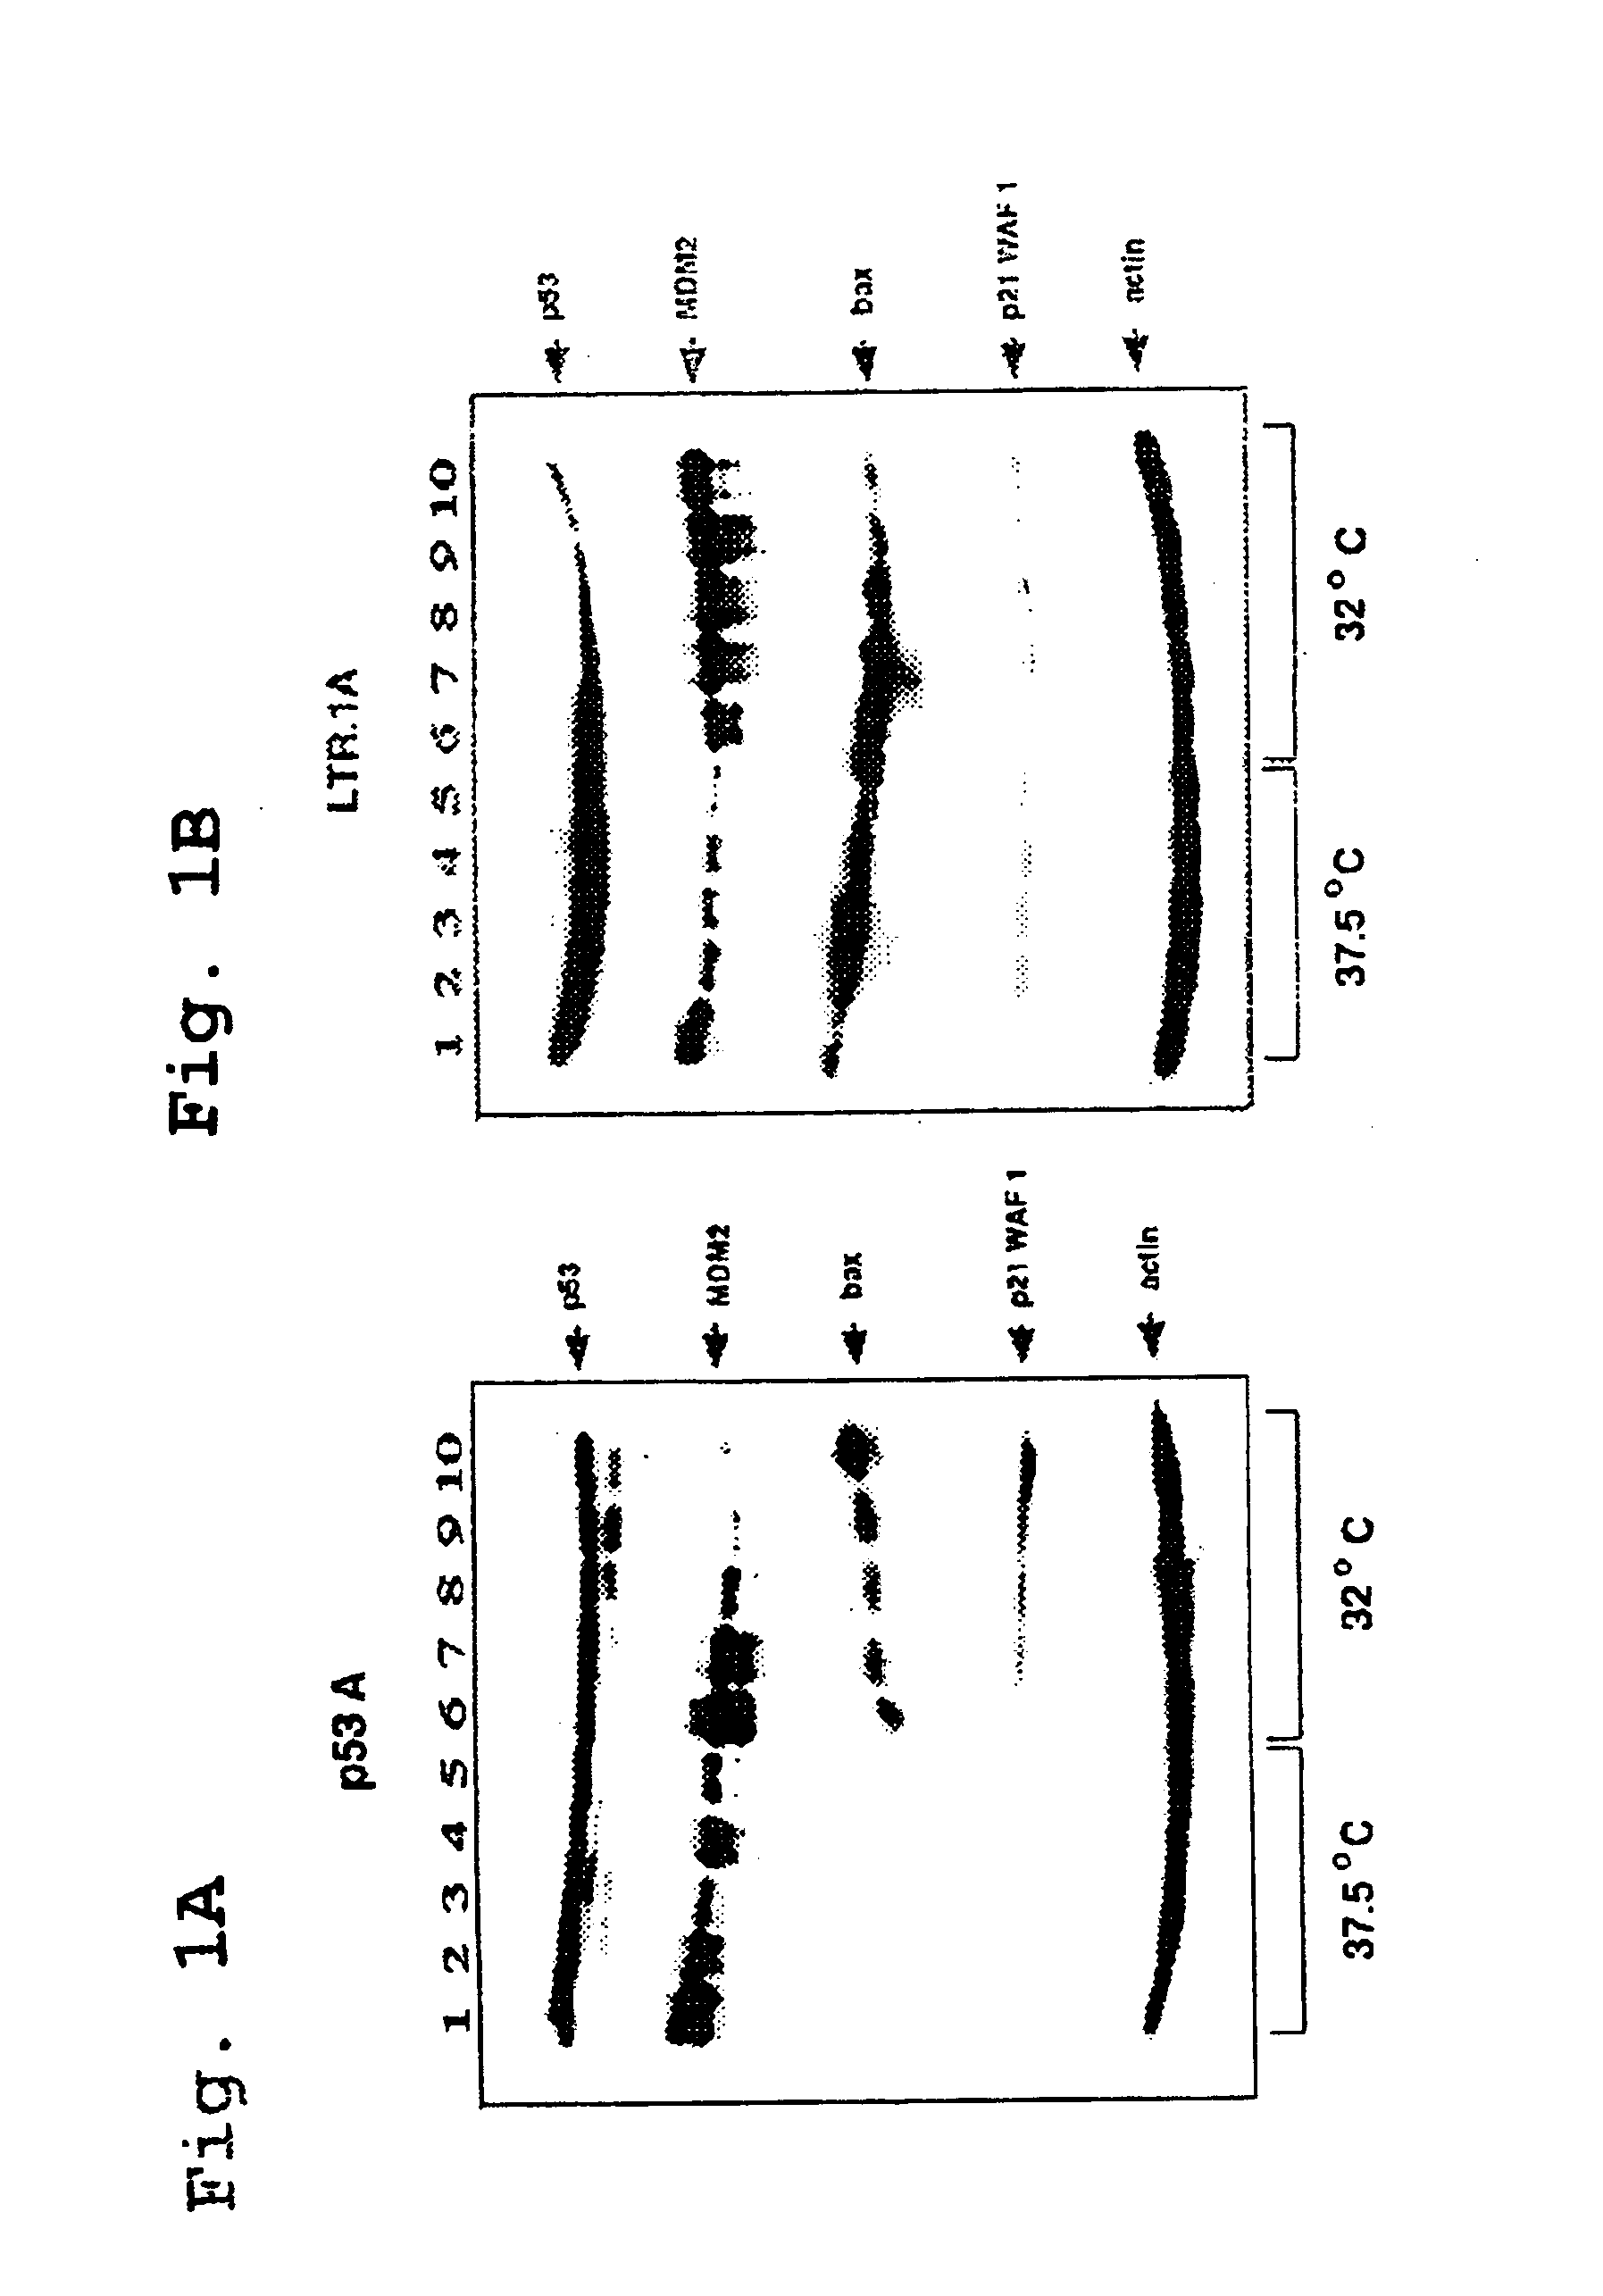 Recombinant cell line and screening method for identifying agents which regulate apoptosis and tumor suppression